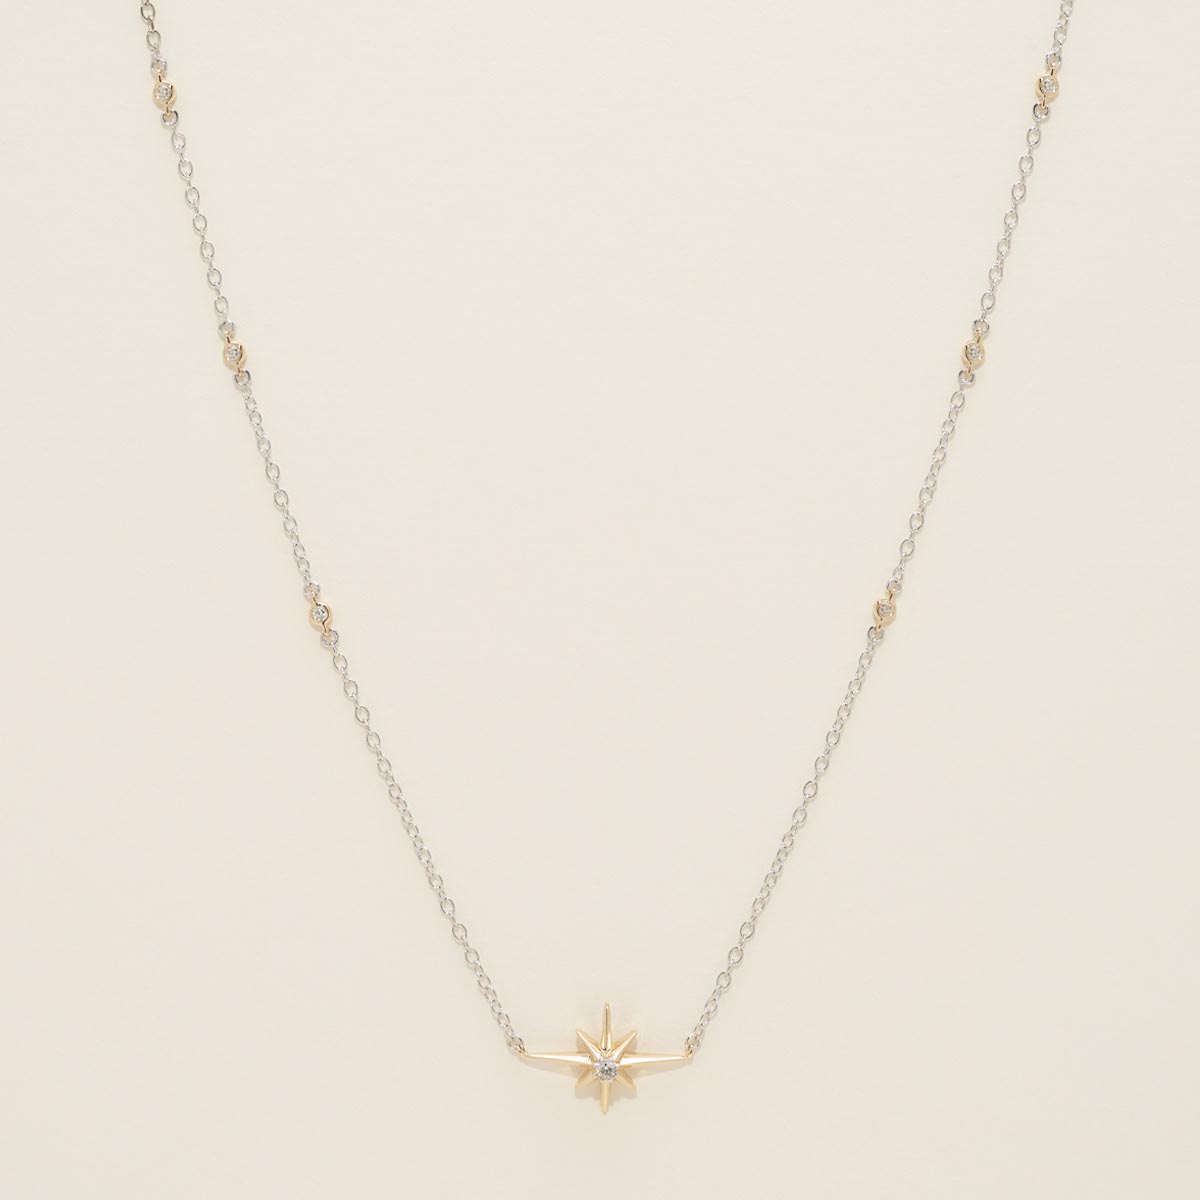 Northern Star Diamond Celestial Station Necklace in Sterling Silver and 10kt Yellow Gold (1/20ct tw)